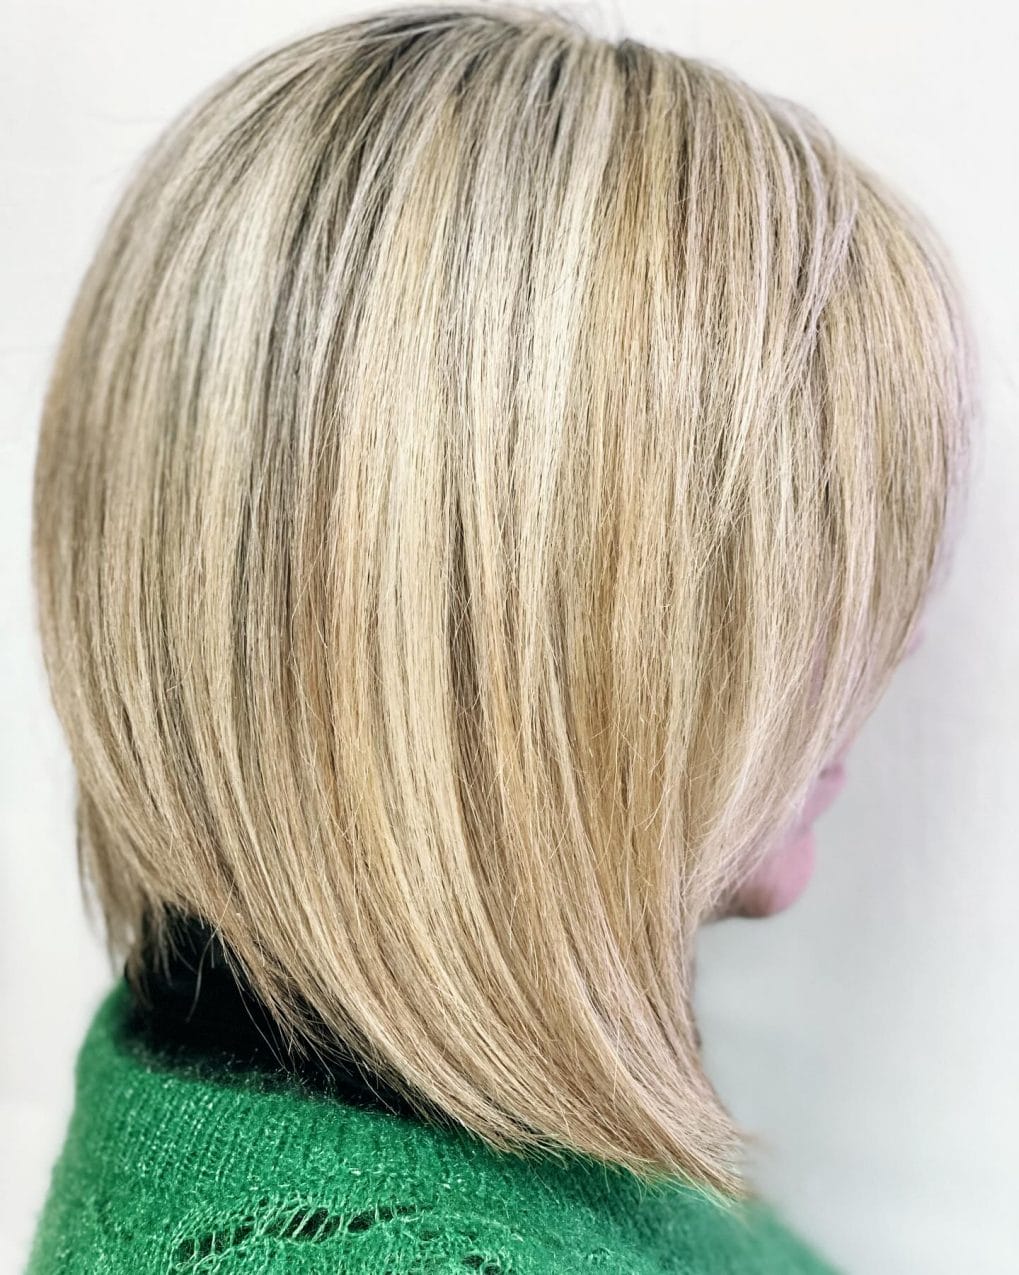 Blonde pixie bob with long side-swept bangs and subtle highlights for added dimension